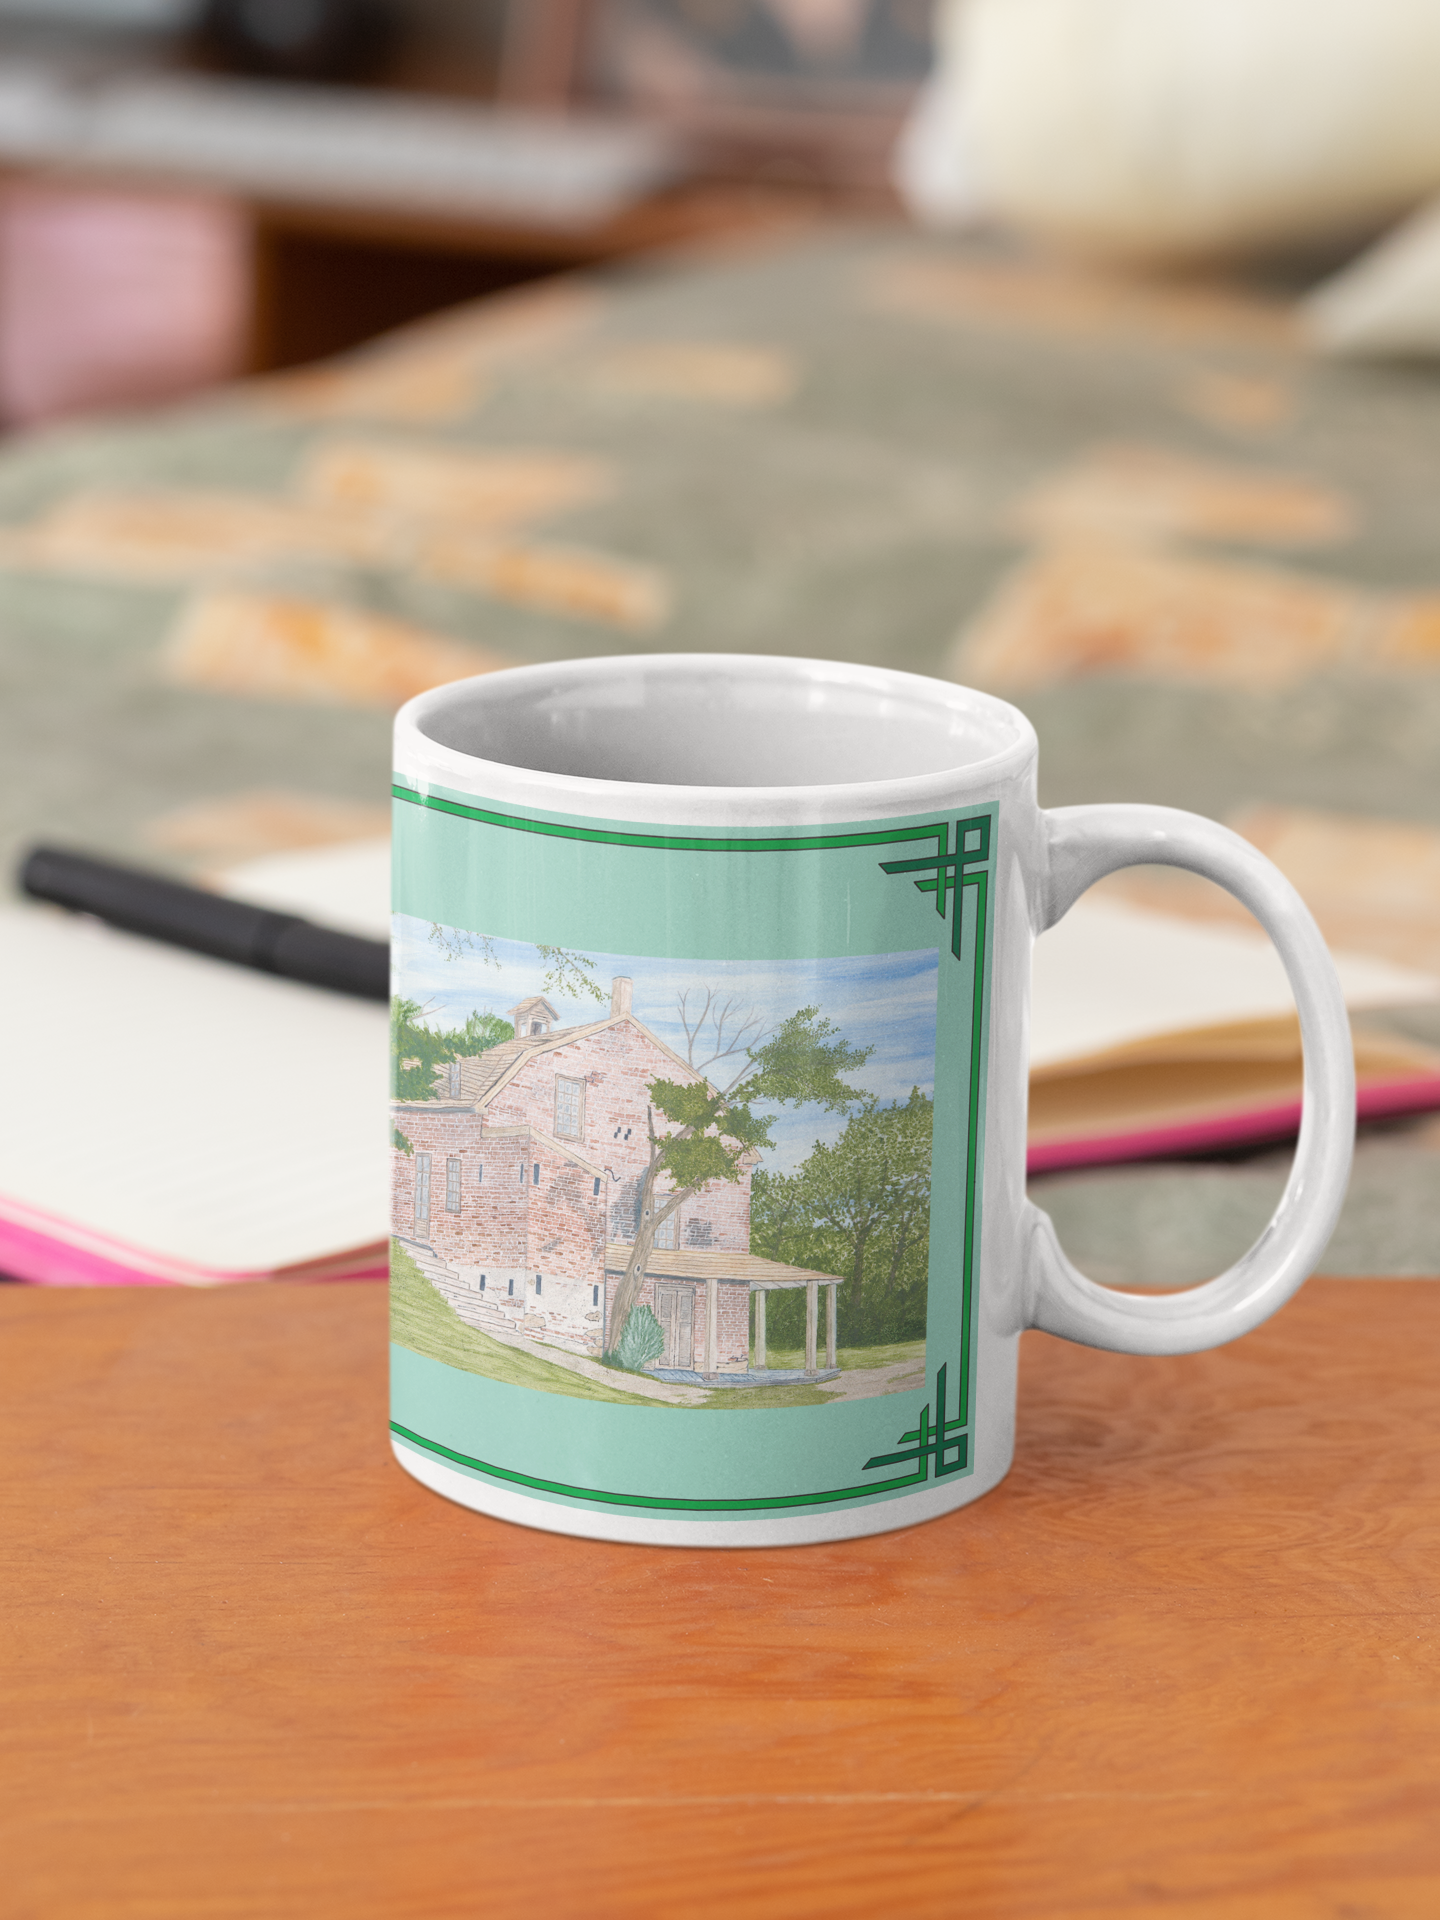 The General Store in New Jersey’s Basto Village State Park recalls a bygone day when the general store was the center of community activity. Enjoy a cup of Coffee, Tea or Hot Chocolate as you gaze at this delightful scene!   The General Store image is framed in Spring green to capture the beauty of the General Store in the freshness of the new season. The mug image is a reproduction of an original watercolor by Lee M. Buchanan.